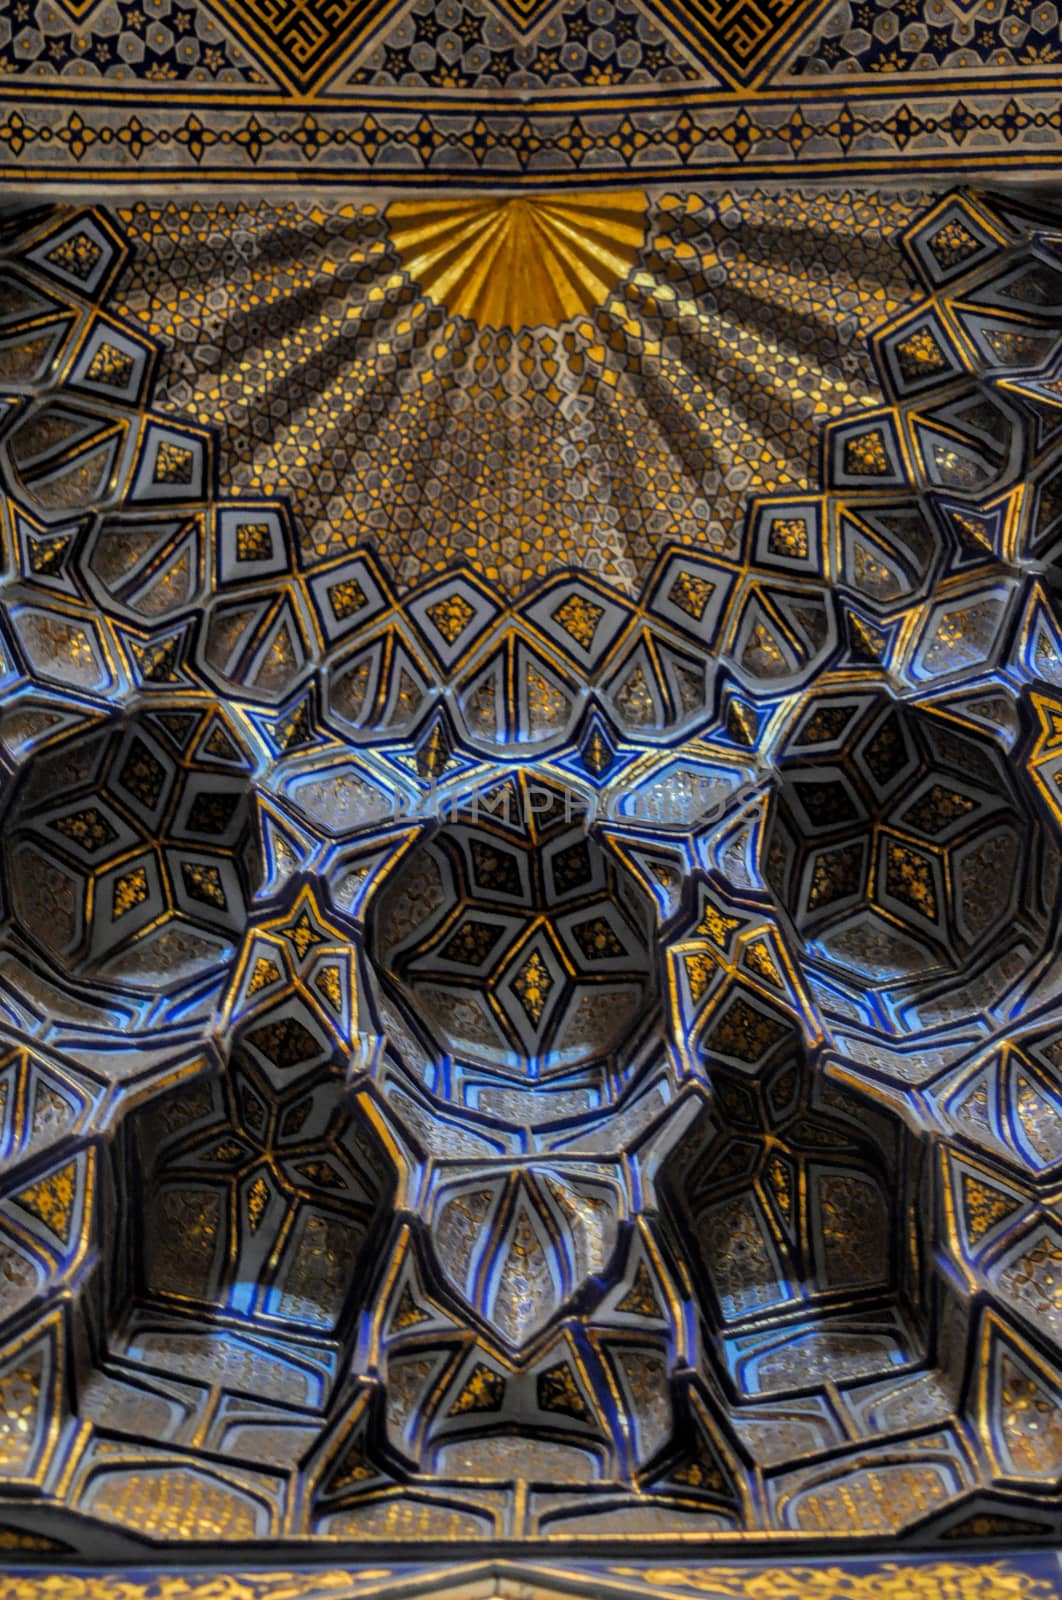 Artwork in mosque by MichalKnitl